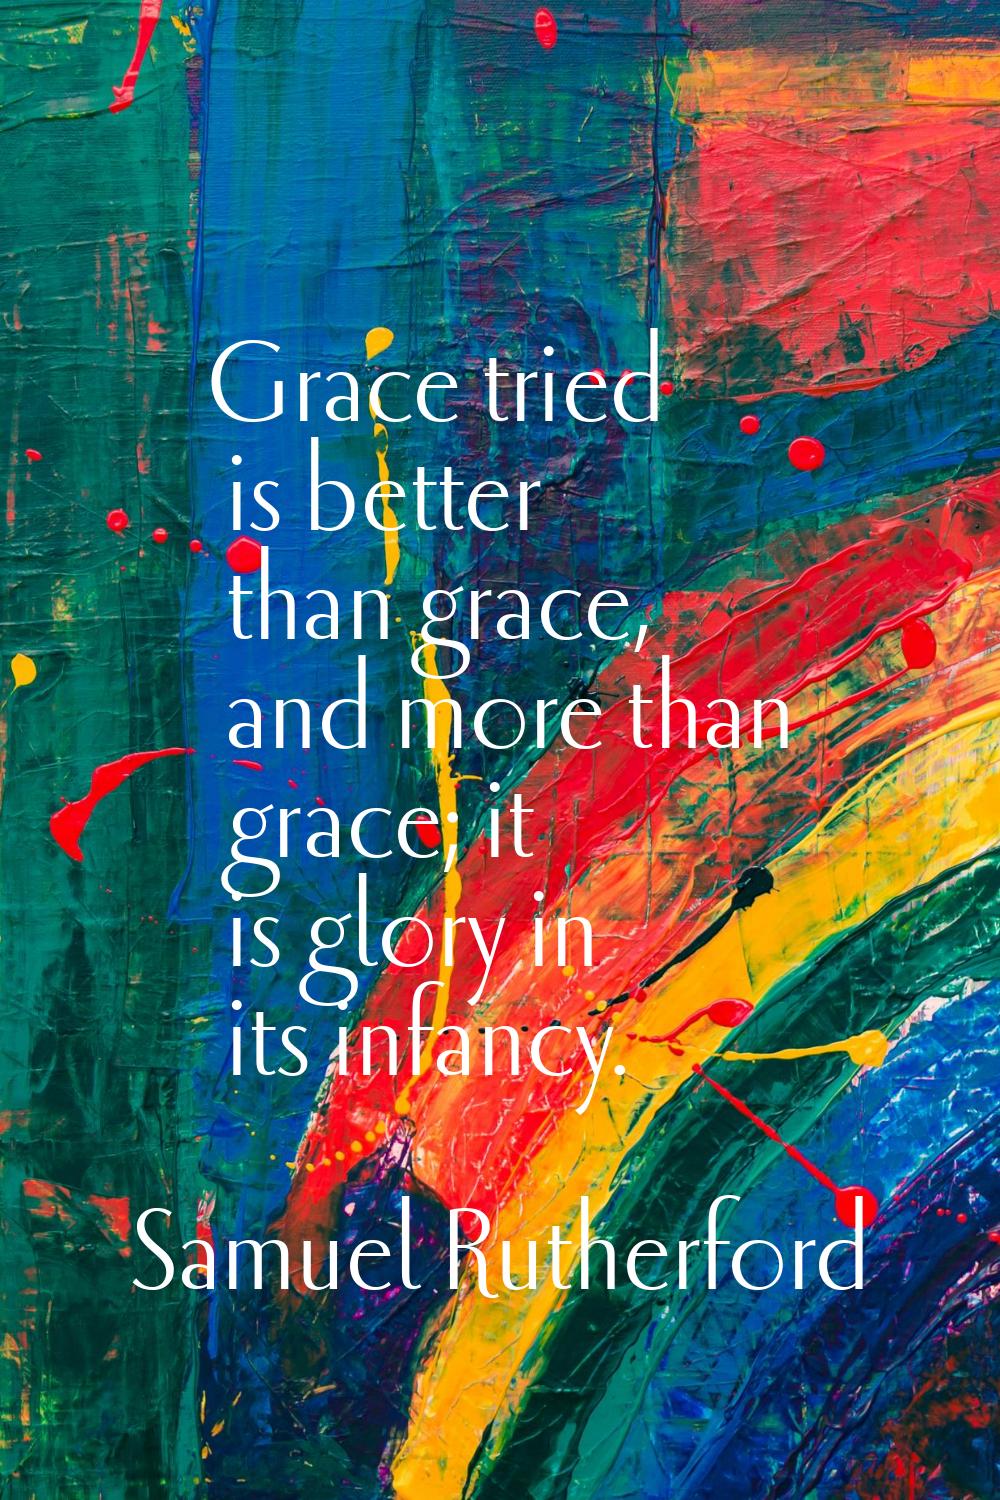 Grace tried is better than grace, and more than grace; it is glory in its infancy.